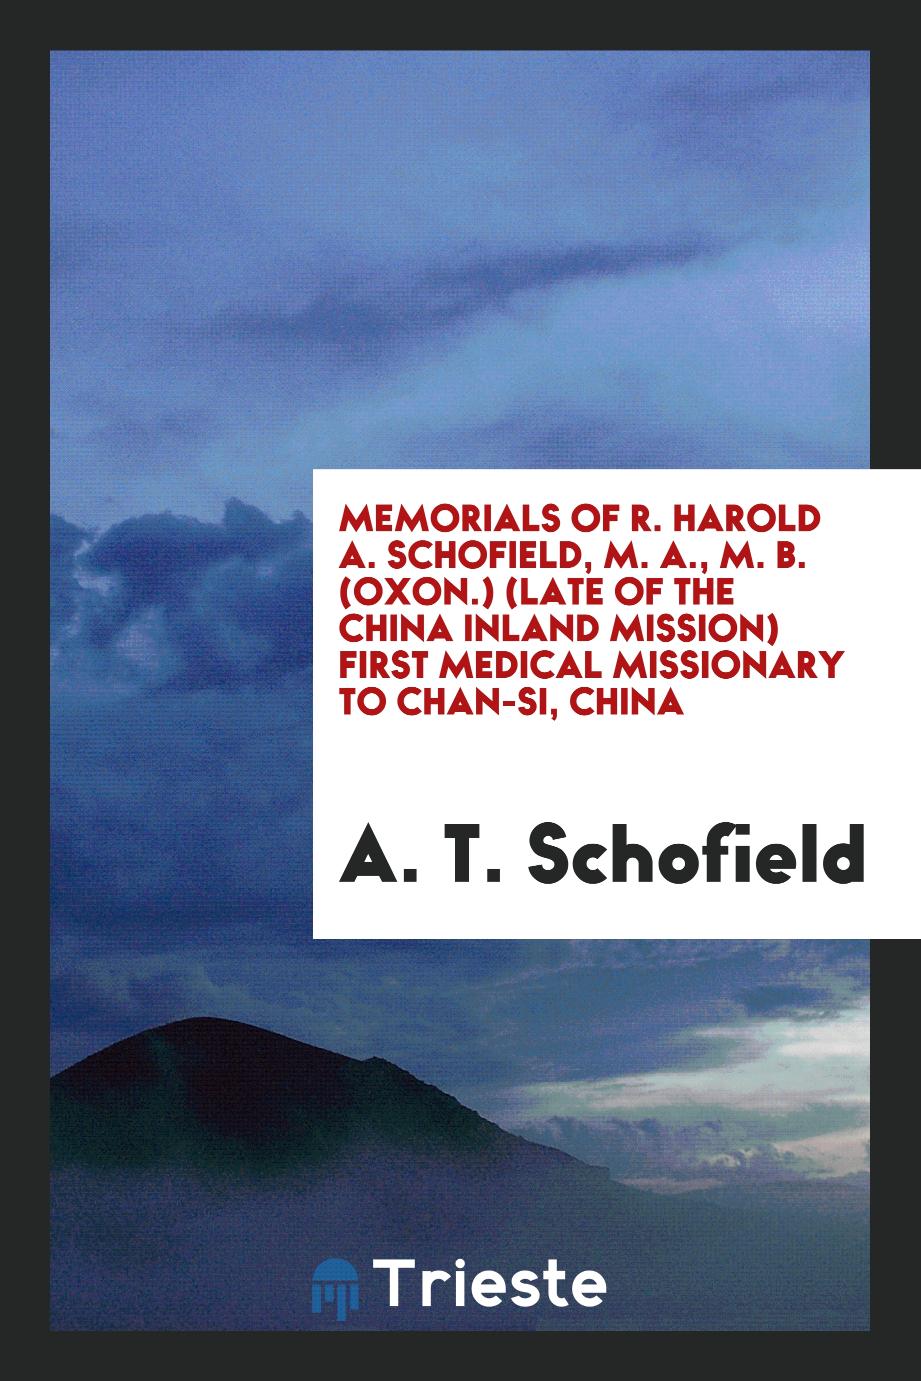 Memorials of R. Harold A. Schofield, M. A., M. B. (Oxon.) (Late of the China Inland Mission) First Medical Missionary to Chan-Si, China